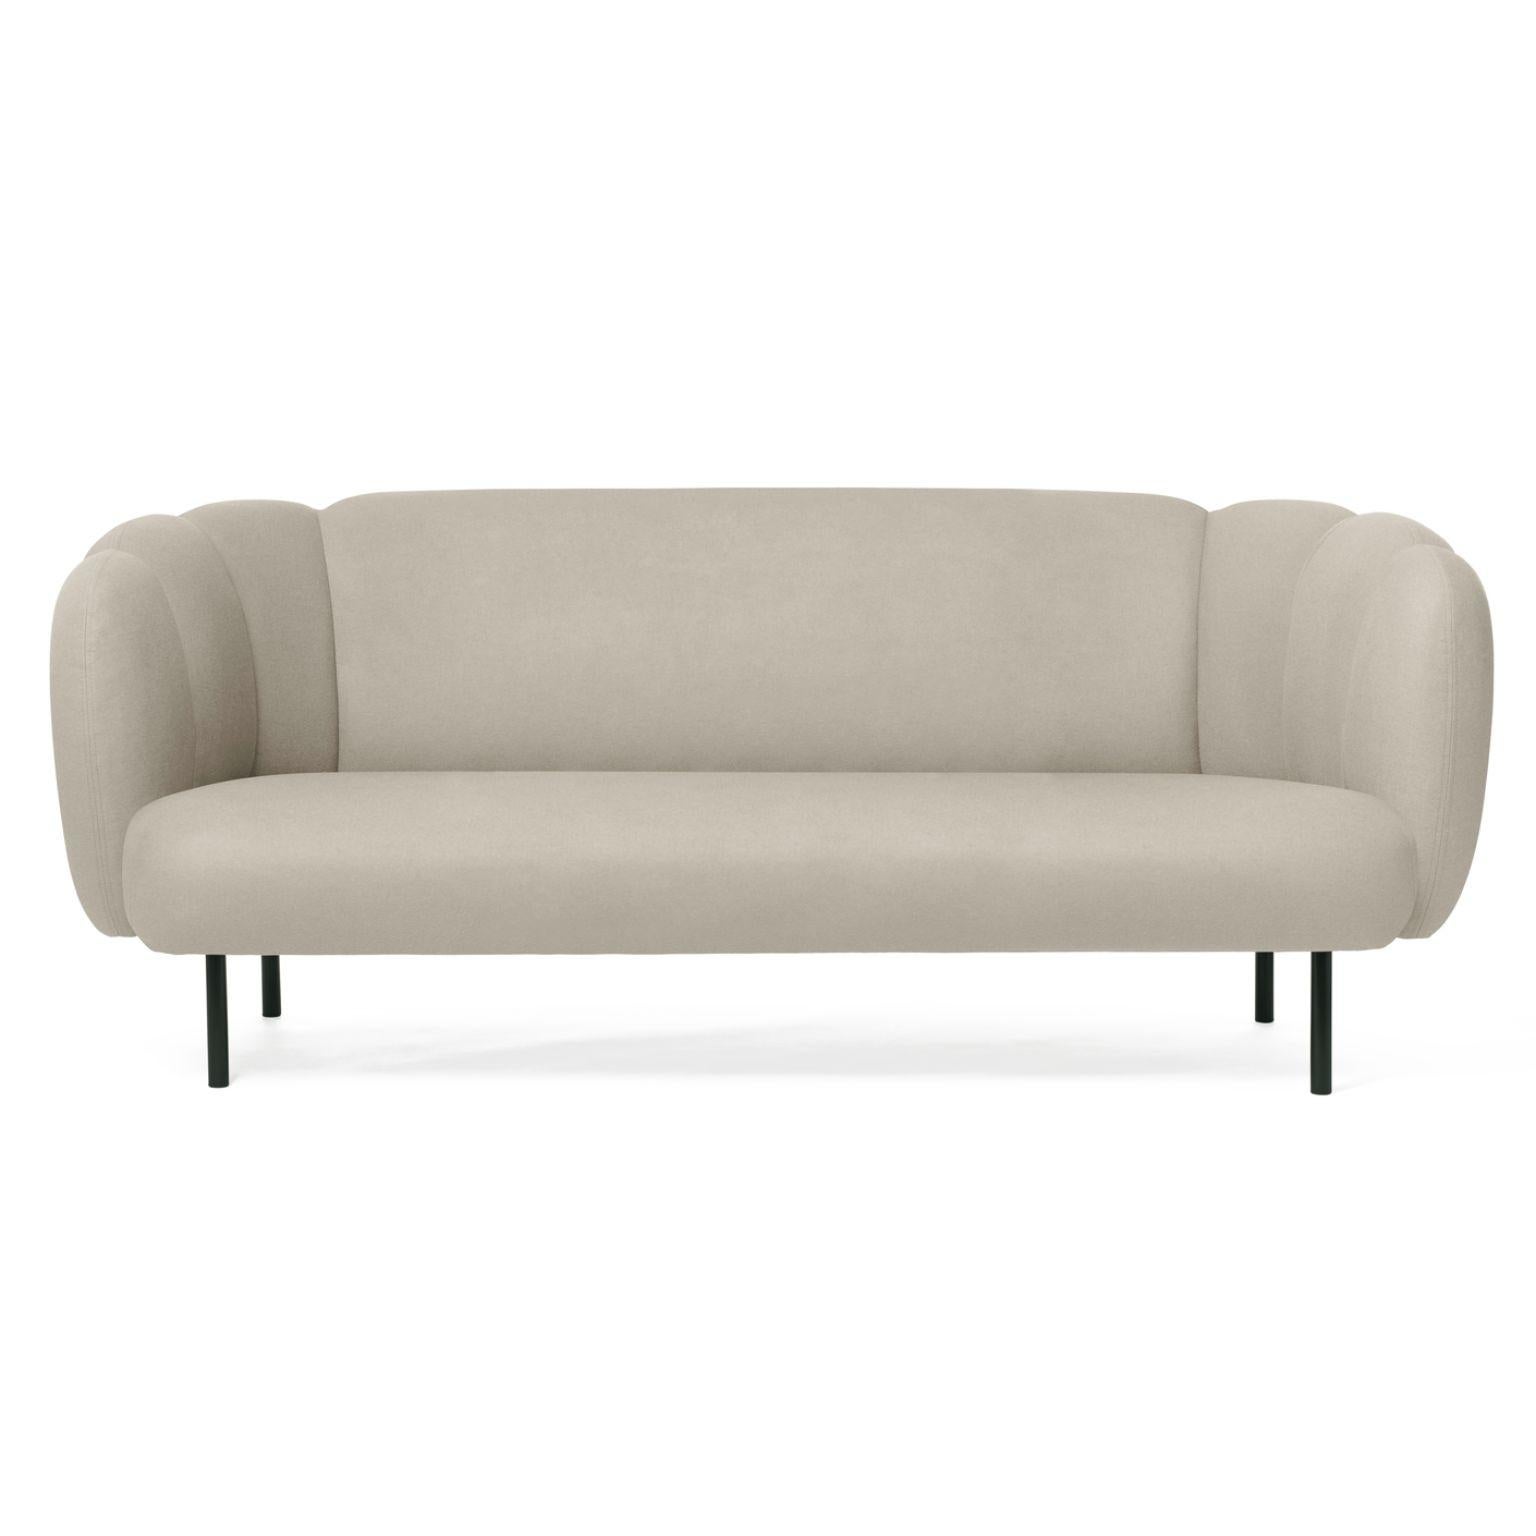 Caper 3 seater with stitches pearl grey by Warm Nordic
Dimensions: D200 x W84 x H 80 cm
Material: Textile upholstery, Wooden frame, Powder coated black steel legs.
Weight: 55.5 kg
Also available in different colours and finishes. 

An elegant